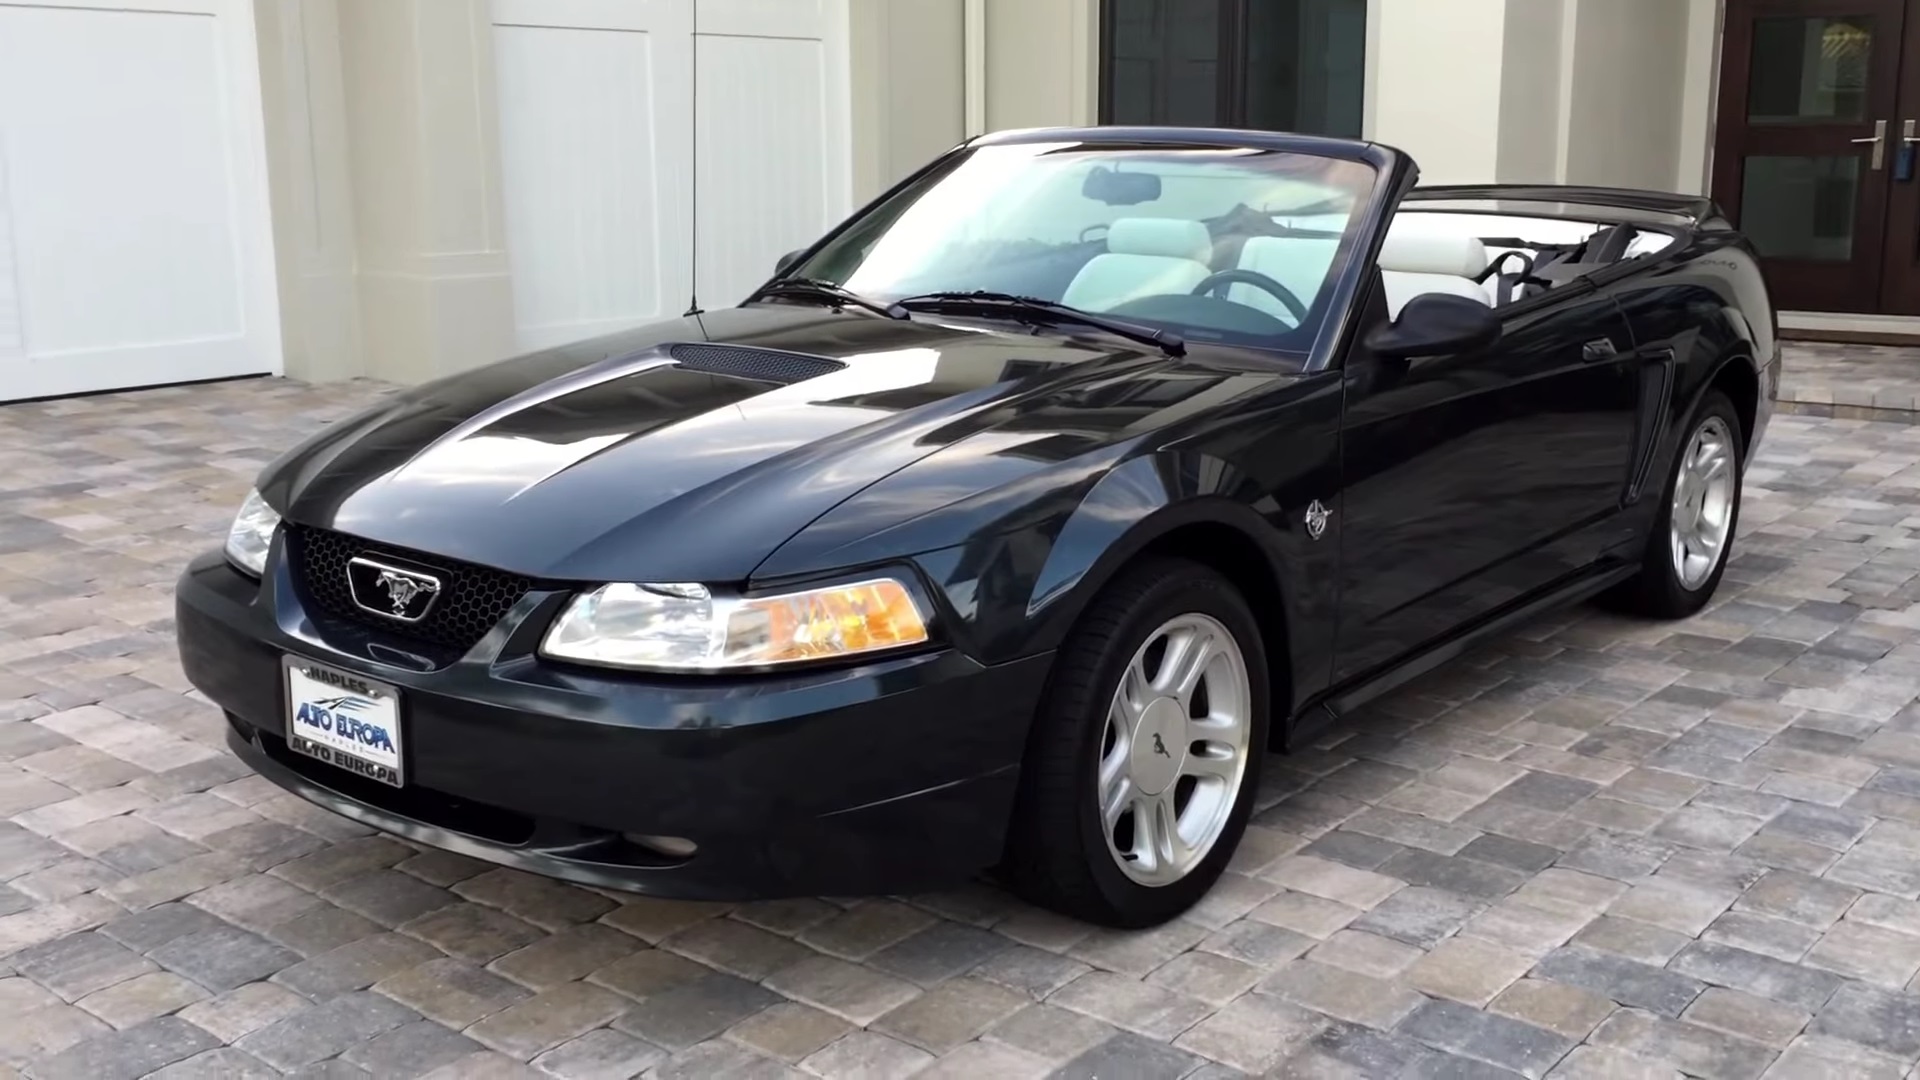 Video: Check Out This Gorgeous 1999 Ford Mustang GT Cabrio